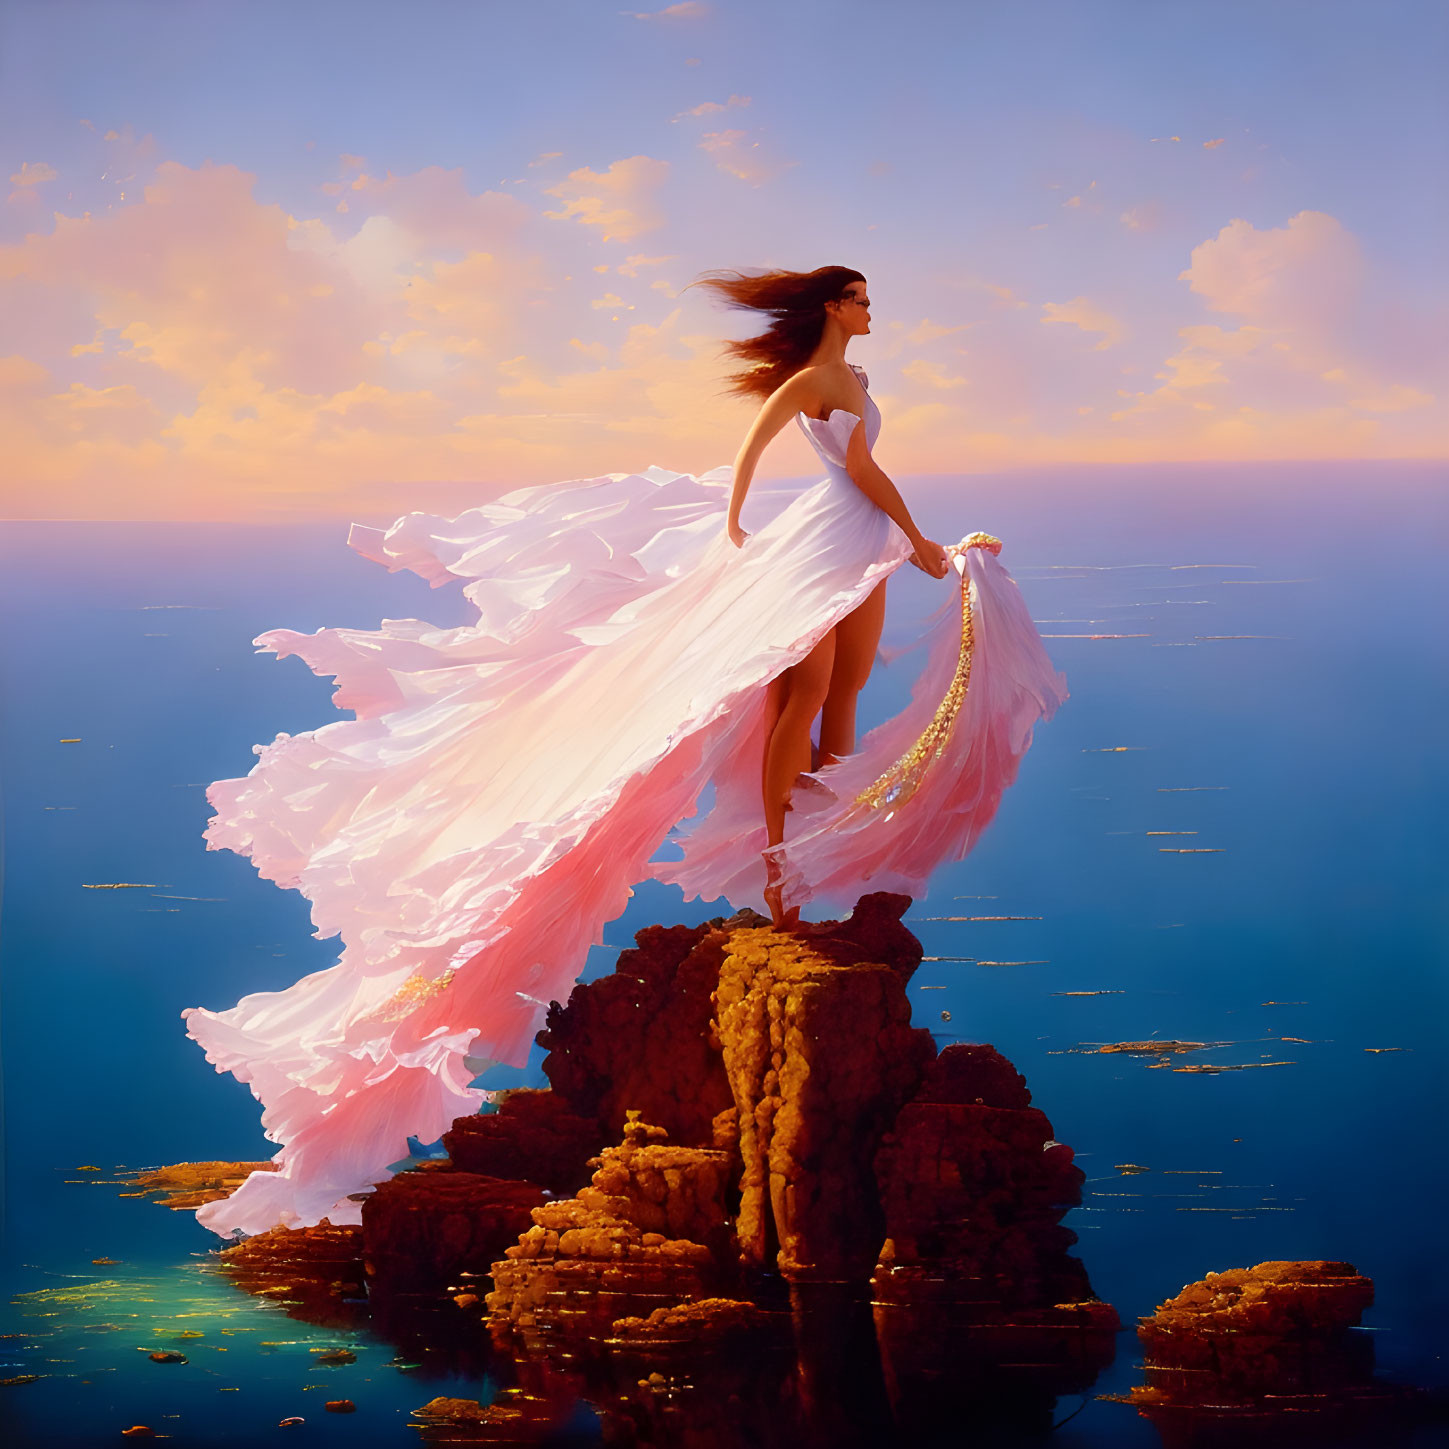 Woman in flowing white dress on rugged cliff overlooking sea under warm sky